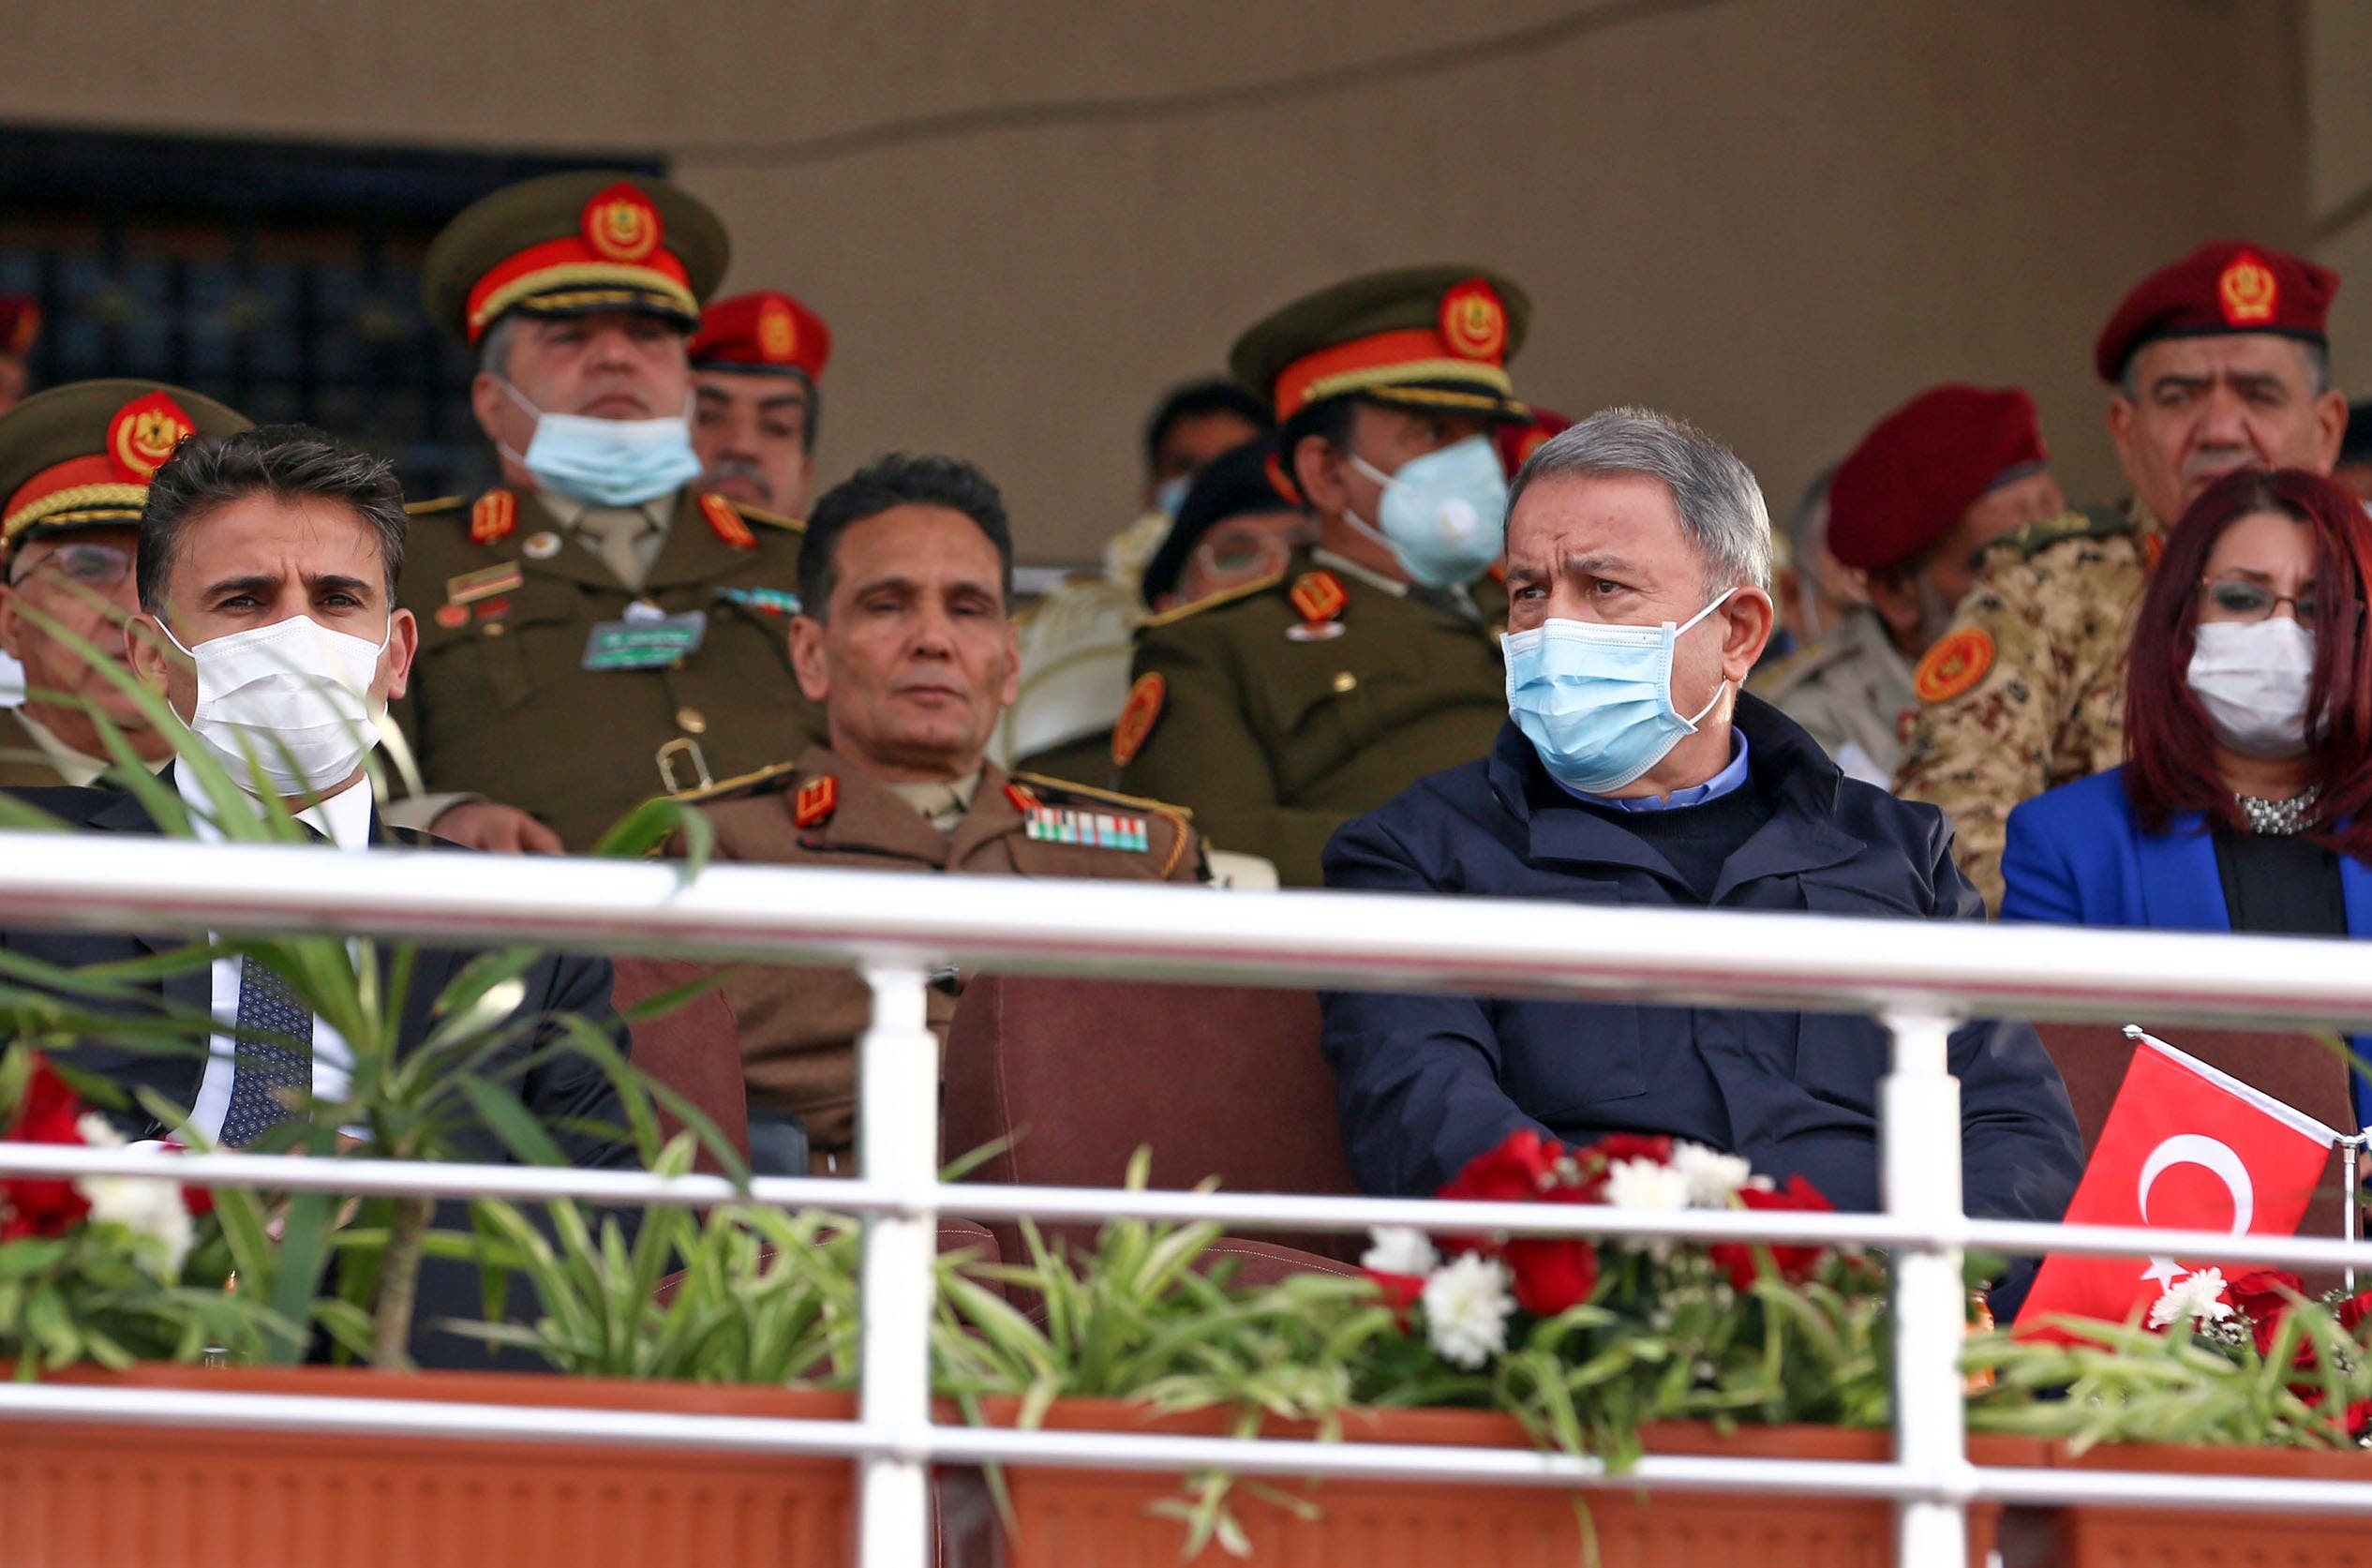 Hulusi Akar attends the graduation ceremony of a group of Al-Wefaq forces in Libya